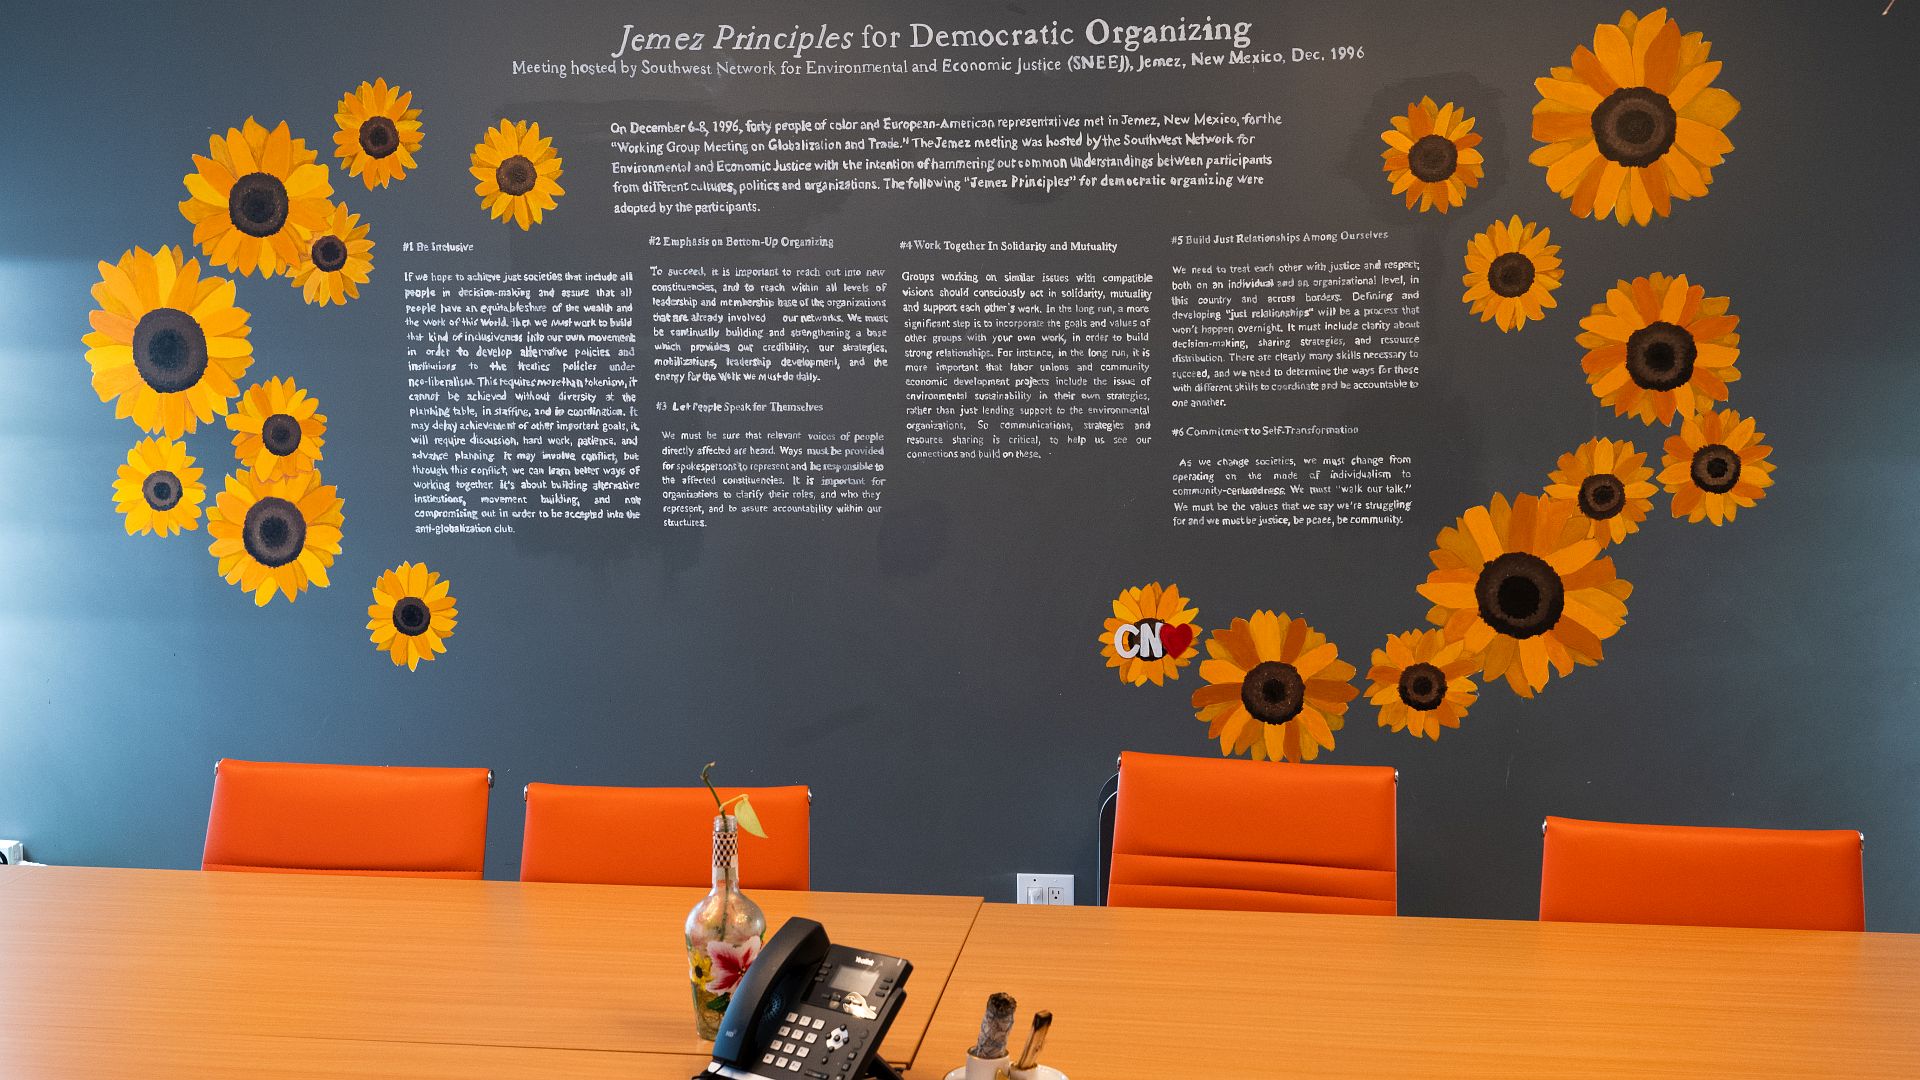 Jemez Principles for Democratic Organizing on the wall of one of UPROSE’s meeting rooms